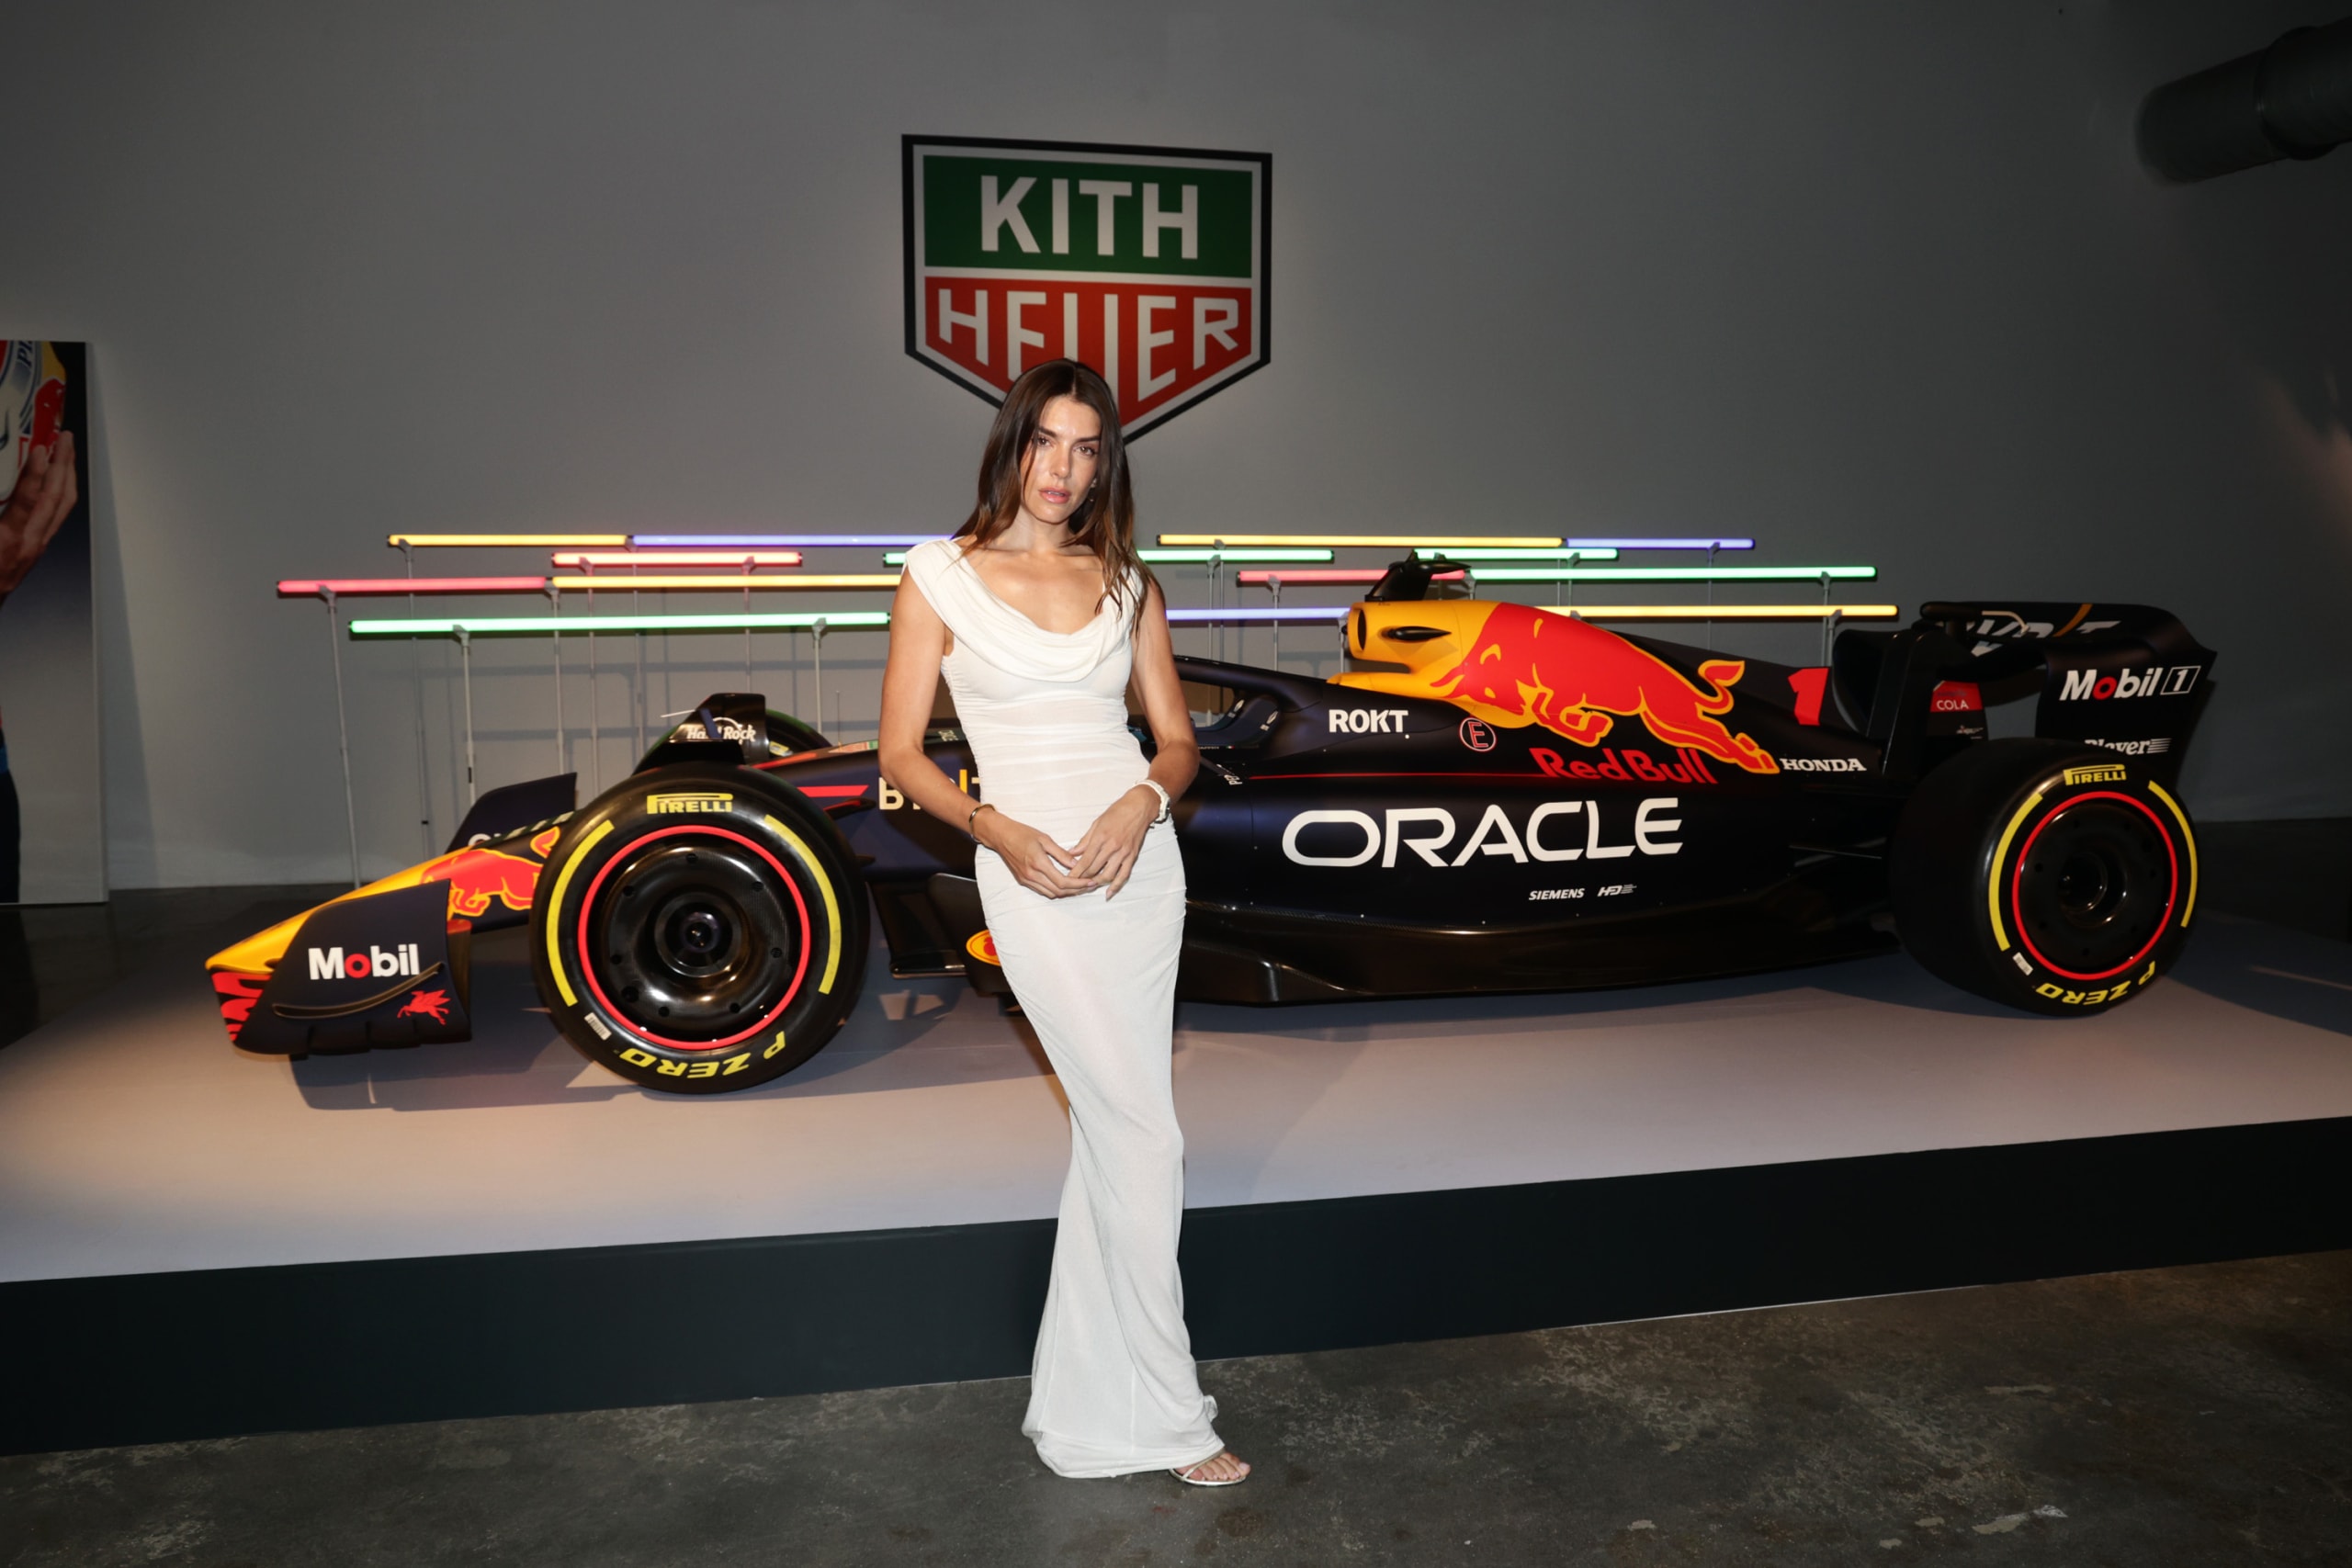 TAG Heuer x KITH Celebrate the Re-Launch of the Formula 1 Model in Miami During the Grand Prix